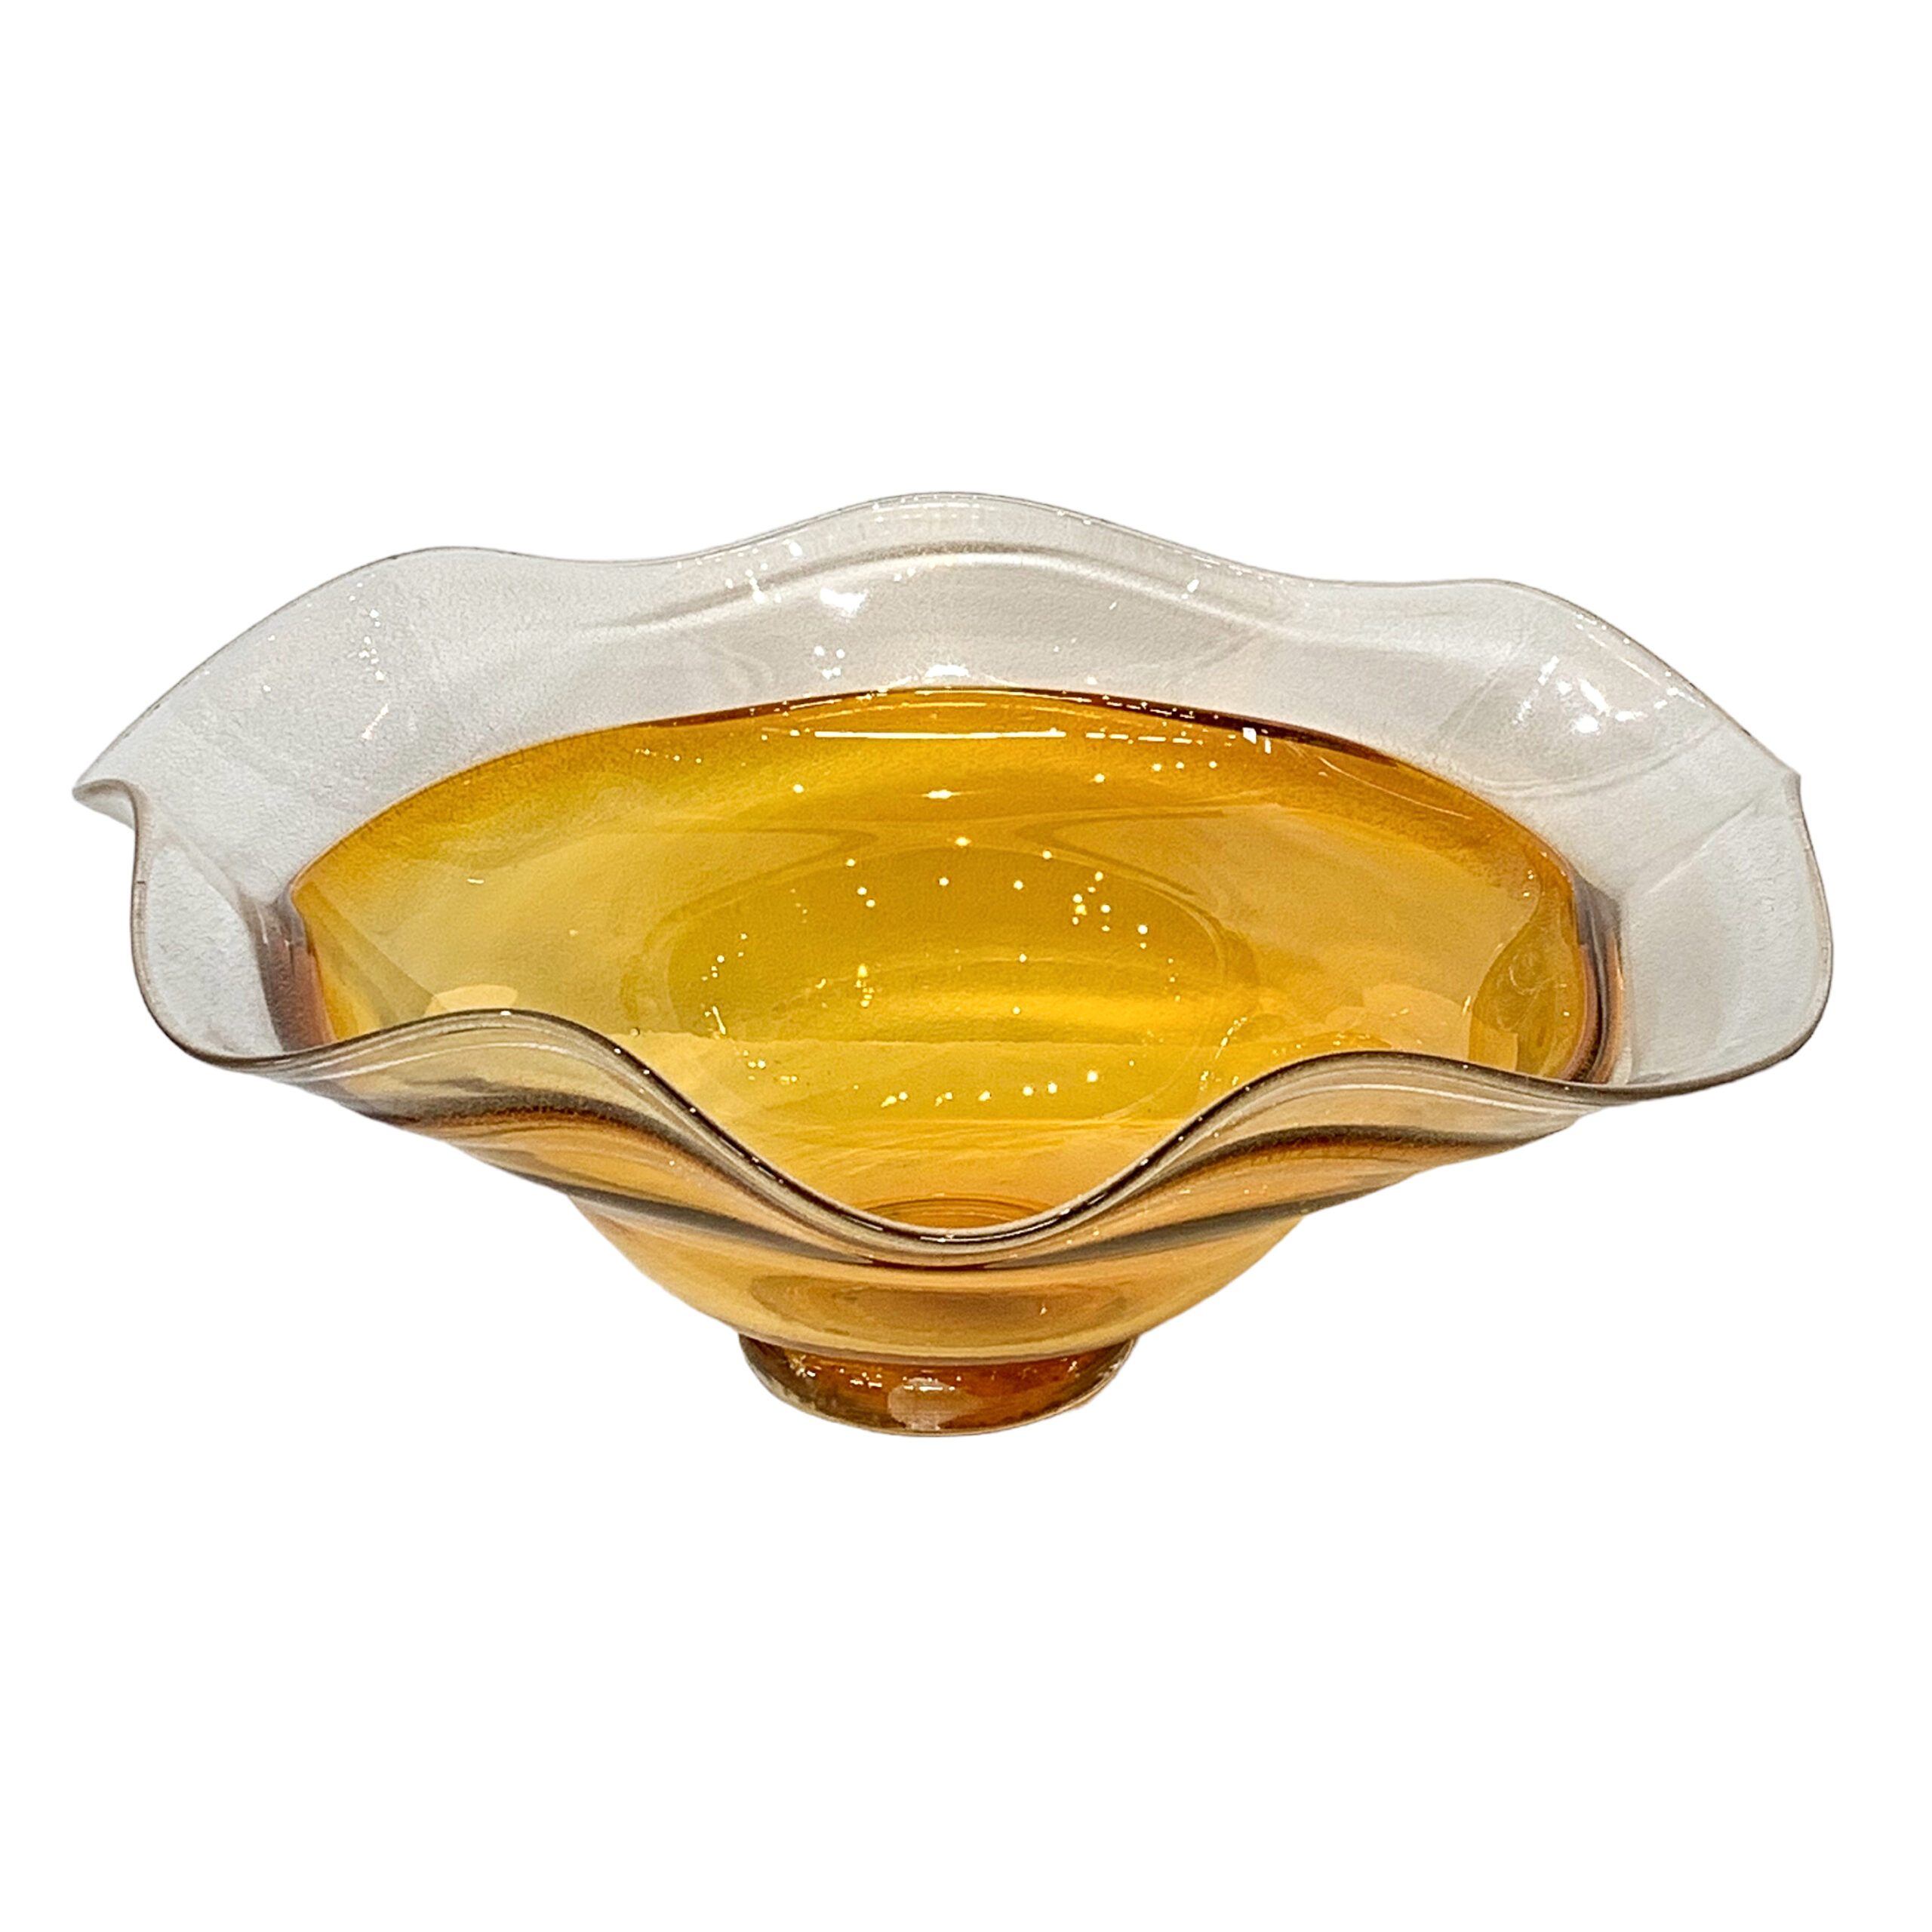 One of a kind yellow blown glass wave bowl by Hayden MacRae at Effusion Art Gallery in Invermere, BC